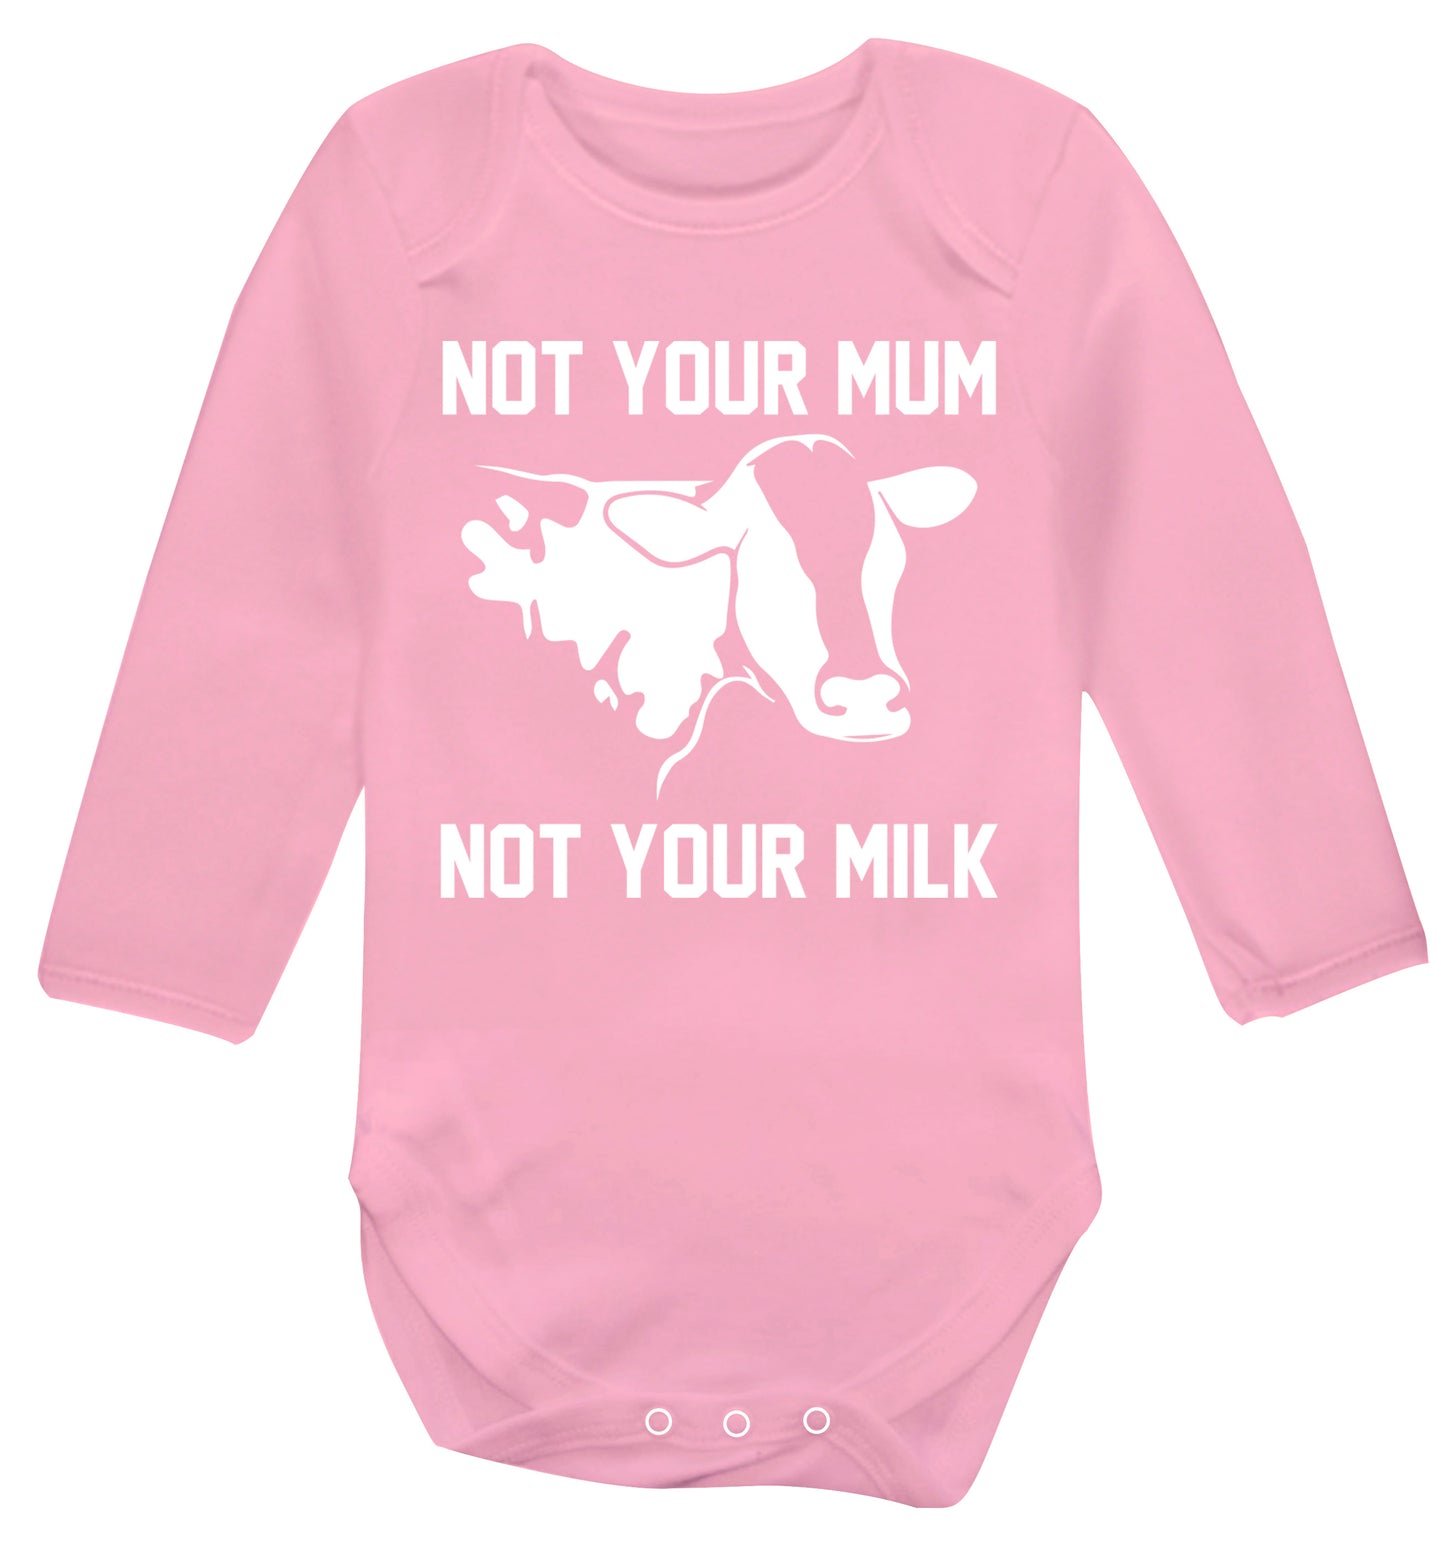 Not your mum not your milk Baby Vest long sleeved pale pink 6-12 months